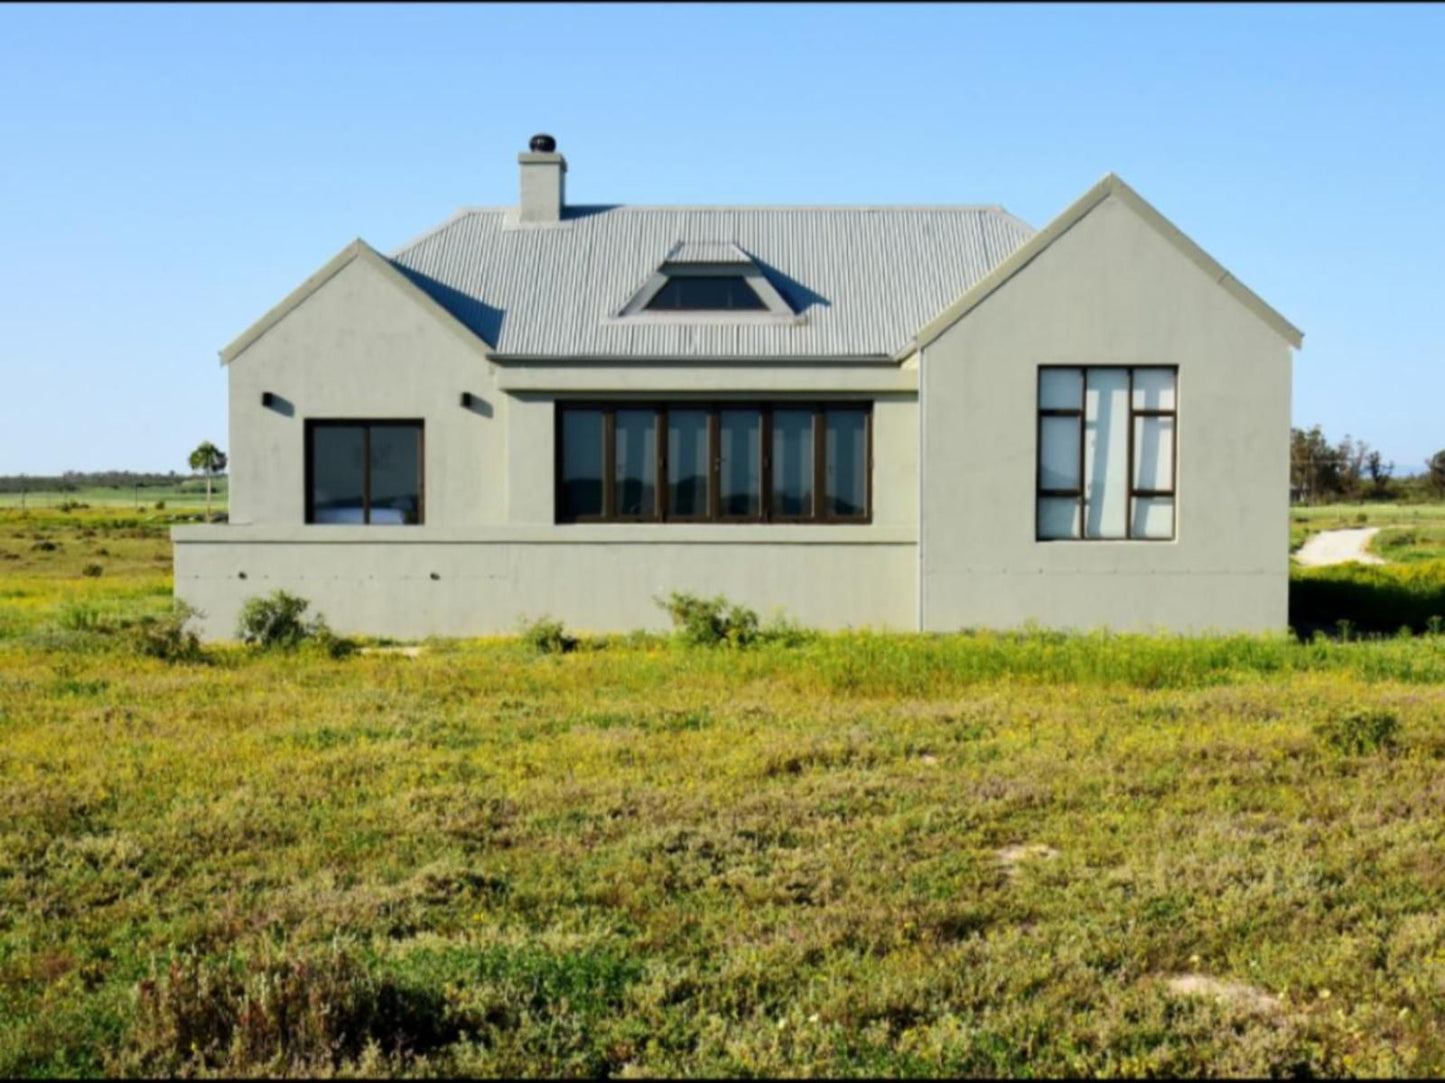 Lermitage Quagga Lodge Velddrif Western Cape South Africa Complementary Colors, Building, Architecture, House